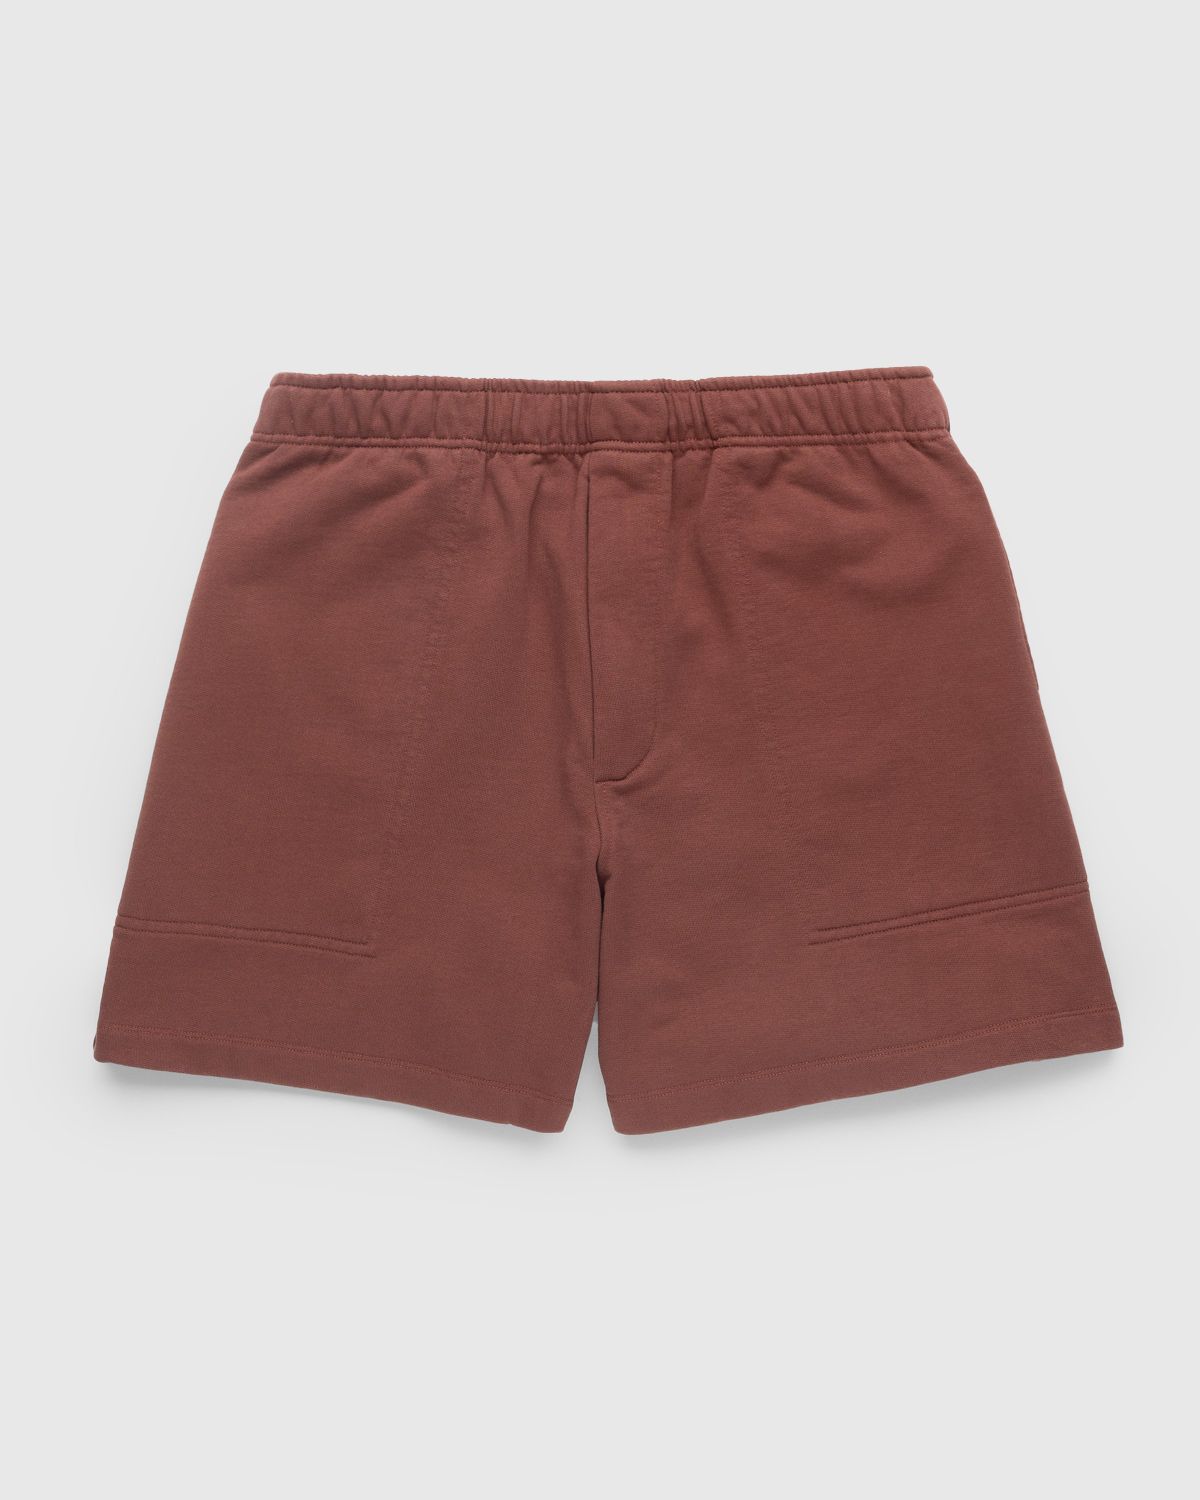 Bode – French Terry Sweat Shorts Brown